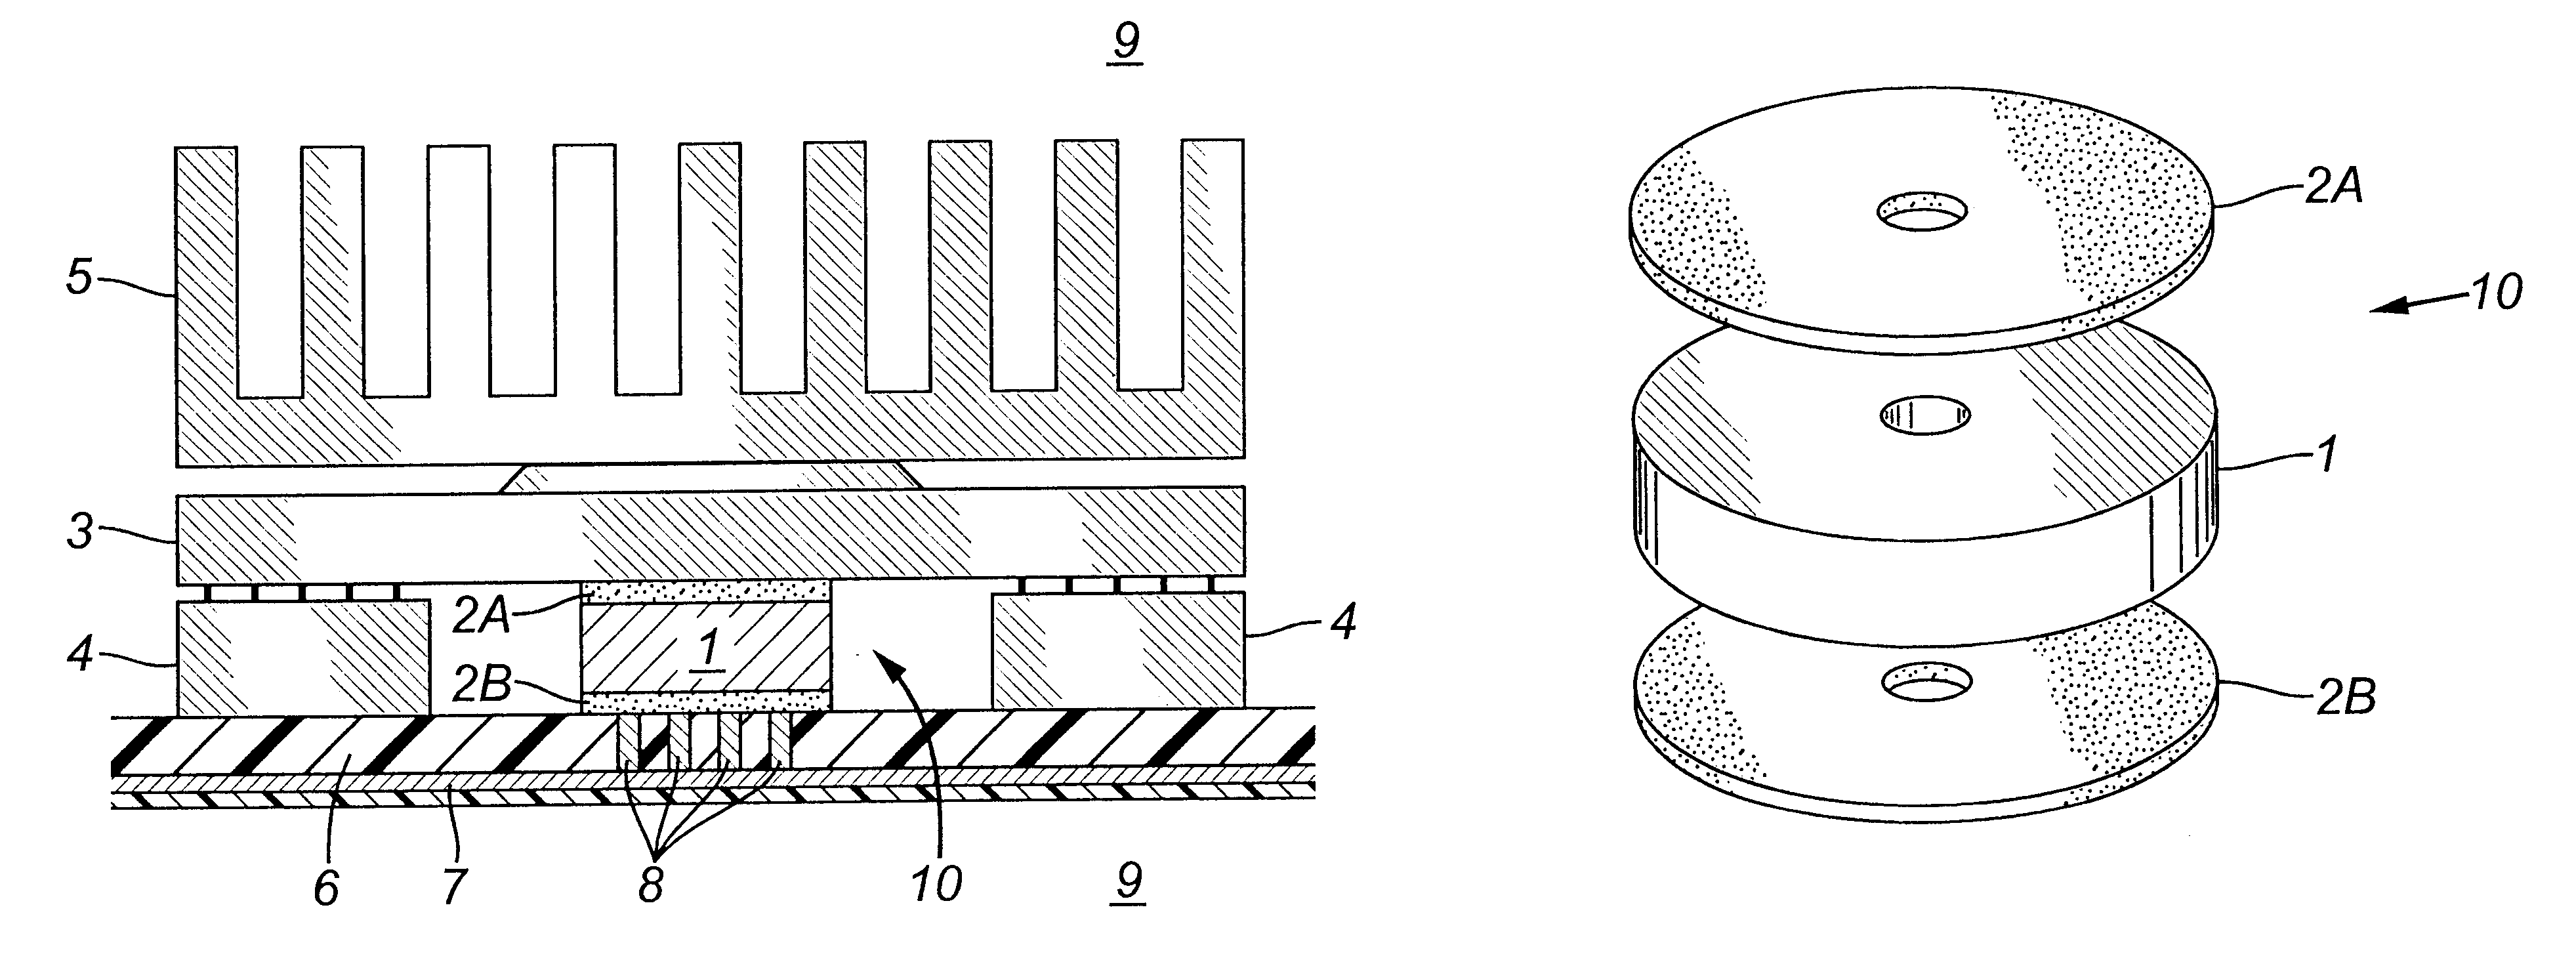 Method and apparatus for heat dispersion from the bottom side of integrated circuit packages on printed circuit boards